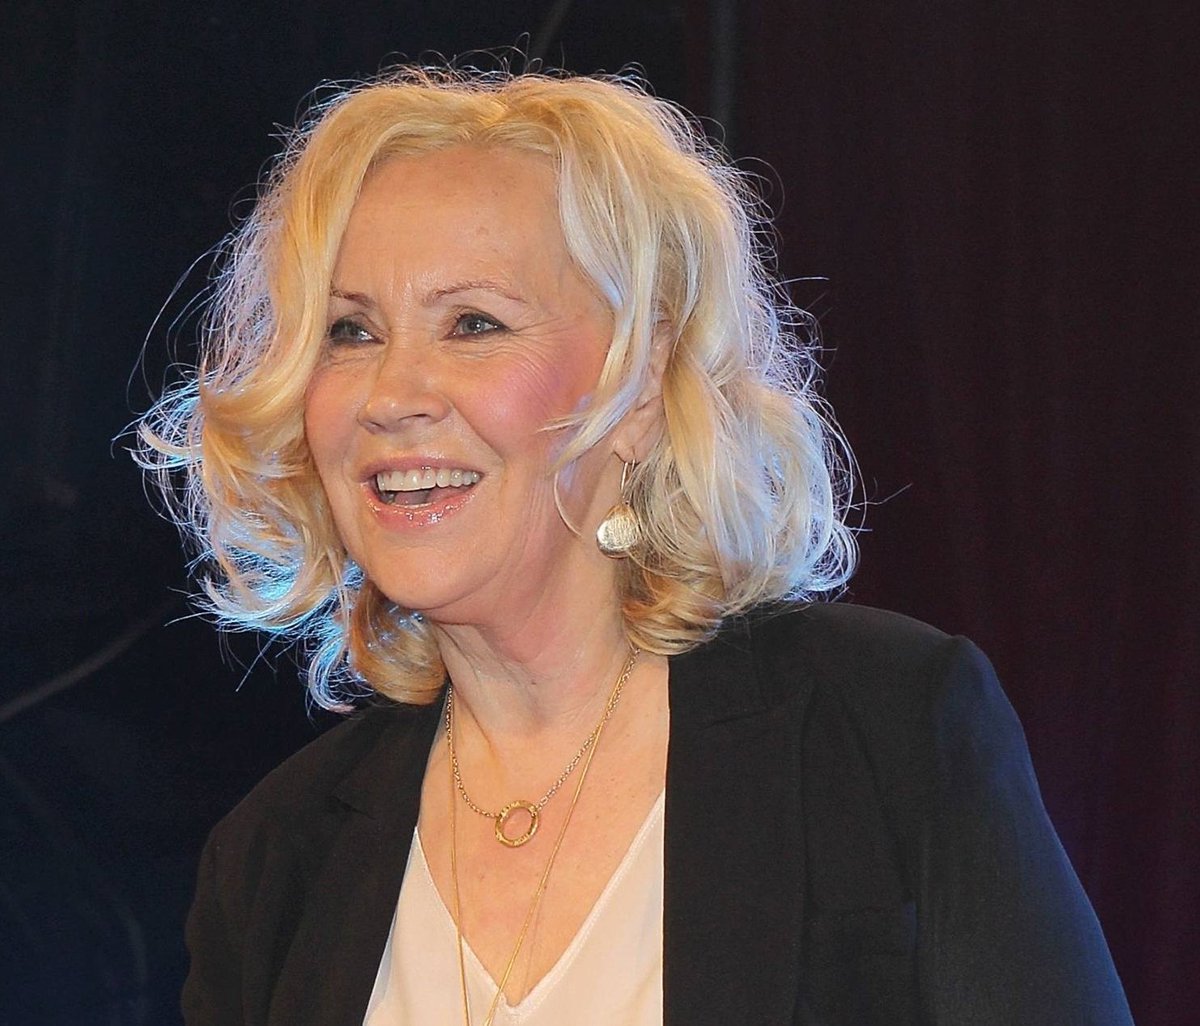 Happy Birthday to the one and only Agnetha Faltskog. 
#ABBA #agnethafältskog
#HappyBirthdayABBAAgnetha